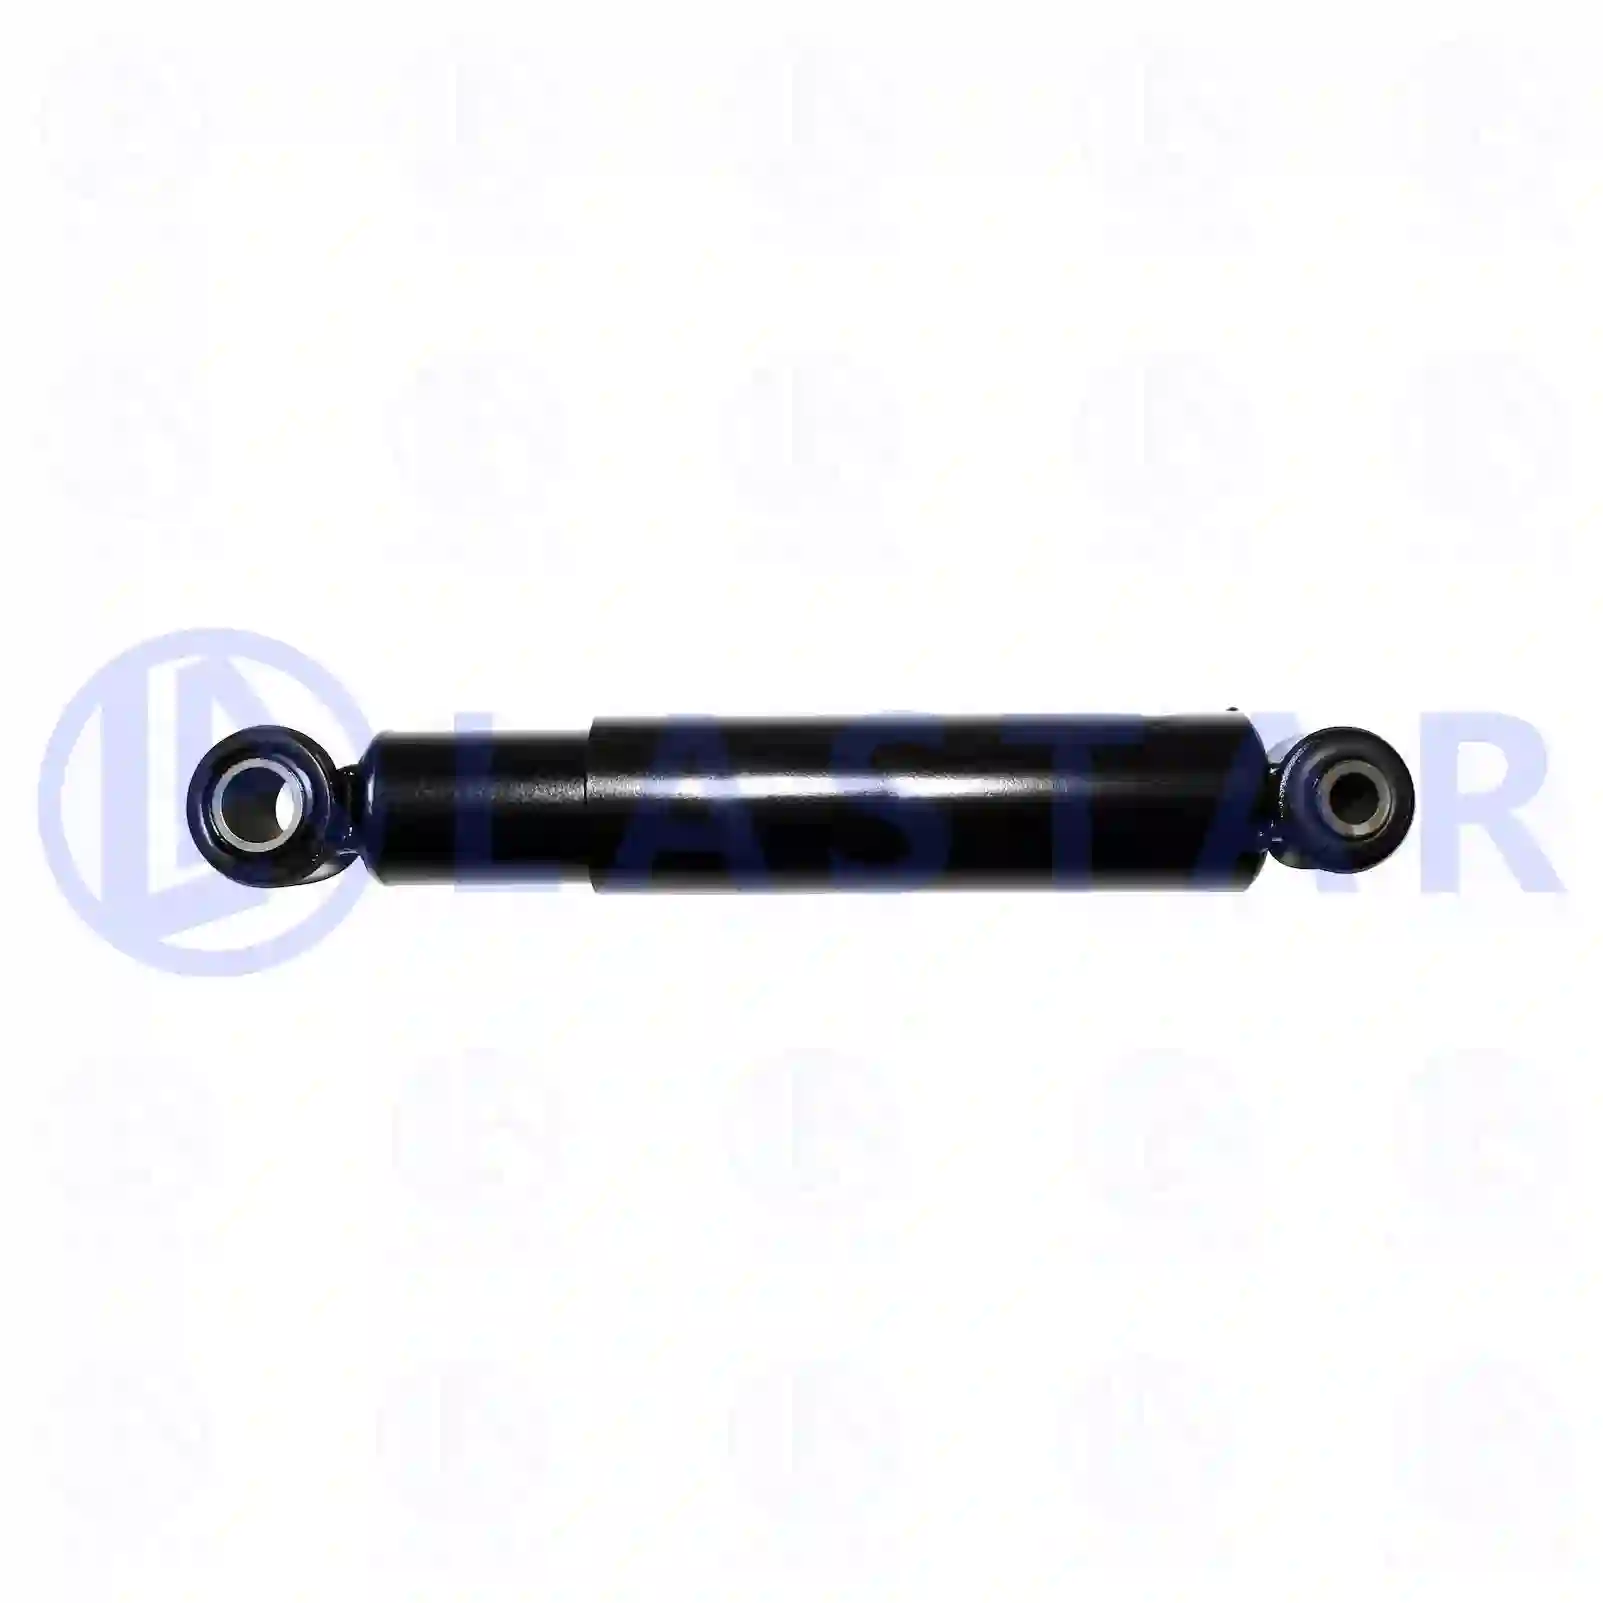 Shock absorber, 77727258, 0222773, 0256260, 0360585, 0740021, 0755262, 1282623, 1283732, 222773, 256260, 360585, 740021, 755262, 83654, 81437016905, 81437026062, 81437026100, 81437016905, ZG41579-0008 ||  77727258 Lastar Spare Part | Truck Spare Parts, Auotomotive Spare Parts Shock absorber, 77727258, 0222773, 0256260, 0360585, 0740021, 0755262, 1282623, 1283732, 222773, 256260, 360585, 740021, 755262, 83654, 81437016905, 81437026062, 81437026100, 81437016905, ZG41579-0008 ||  77727258 Lastar Spare Part | Truck Spare Parts, Auotomotive Spare Parts